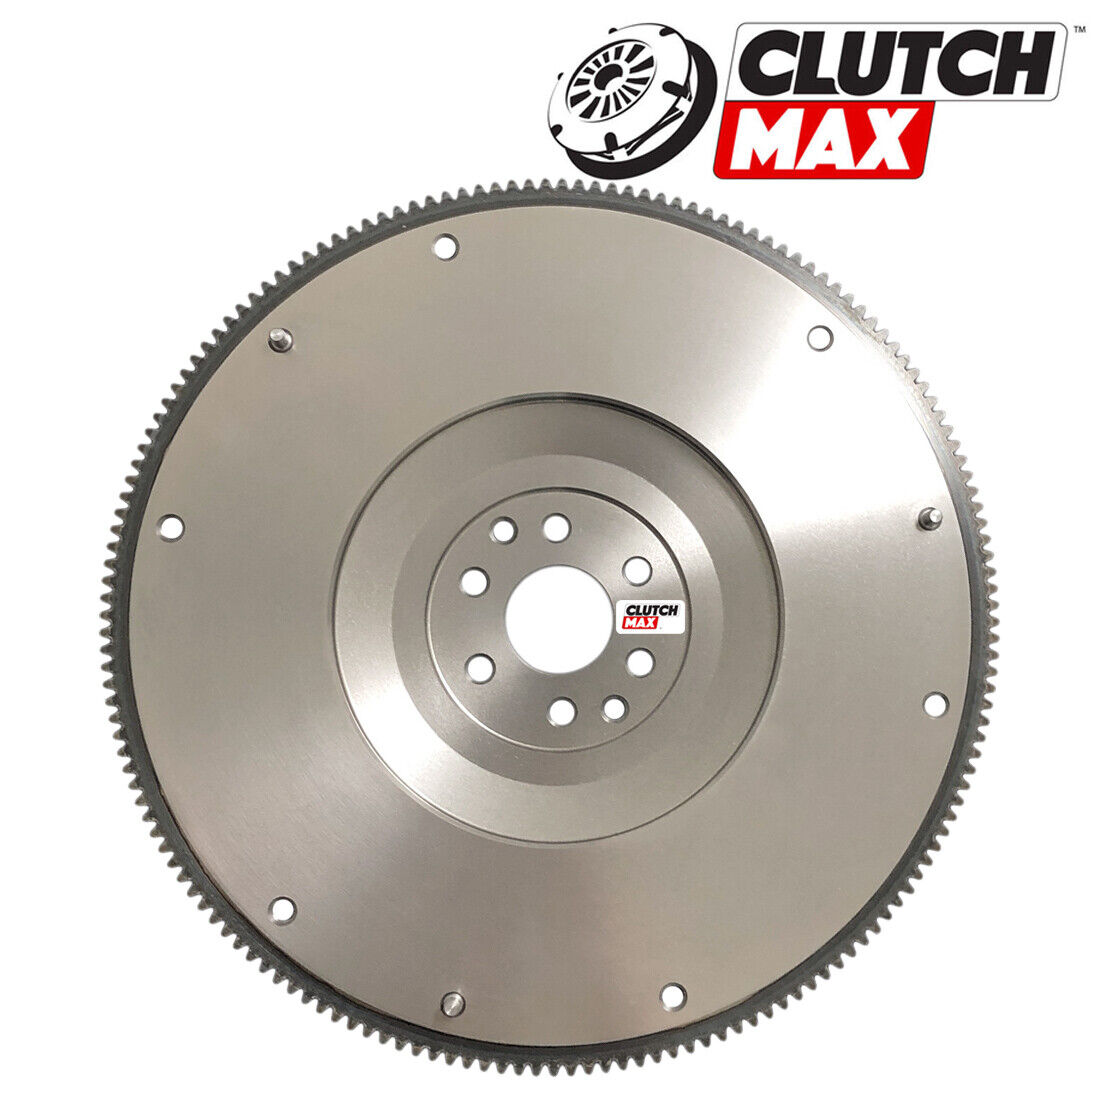 FRPP REPLACEMENT PERFORMANCE CLUTCH FLYWHEEL for 6-BOLT FORD MUSTANG 4.6L 280ci